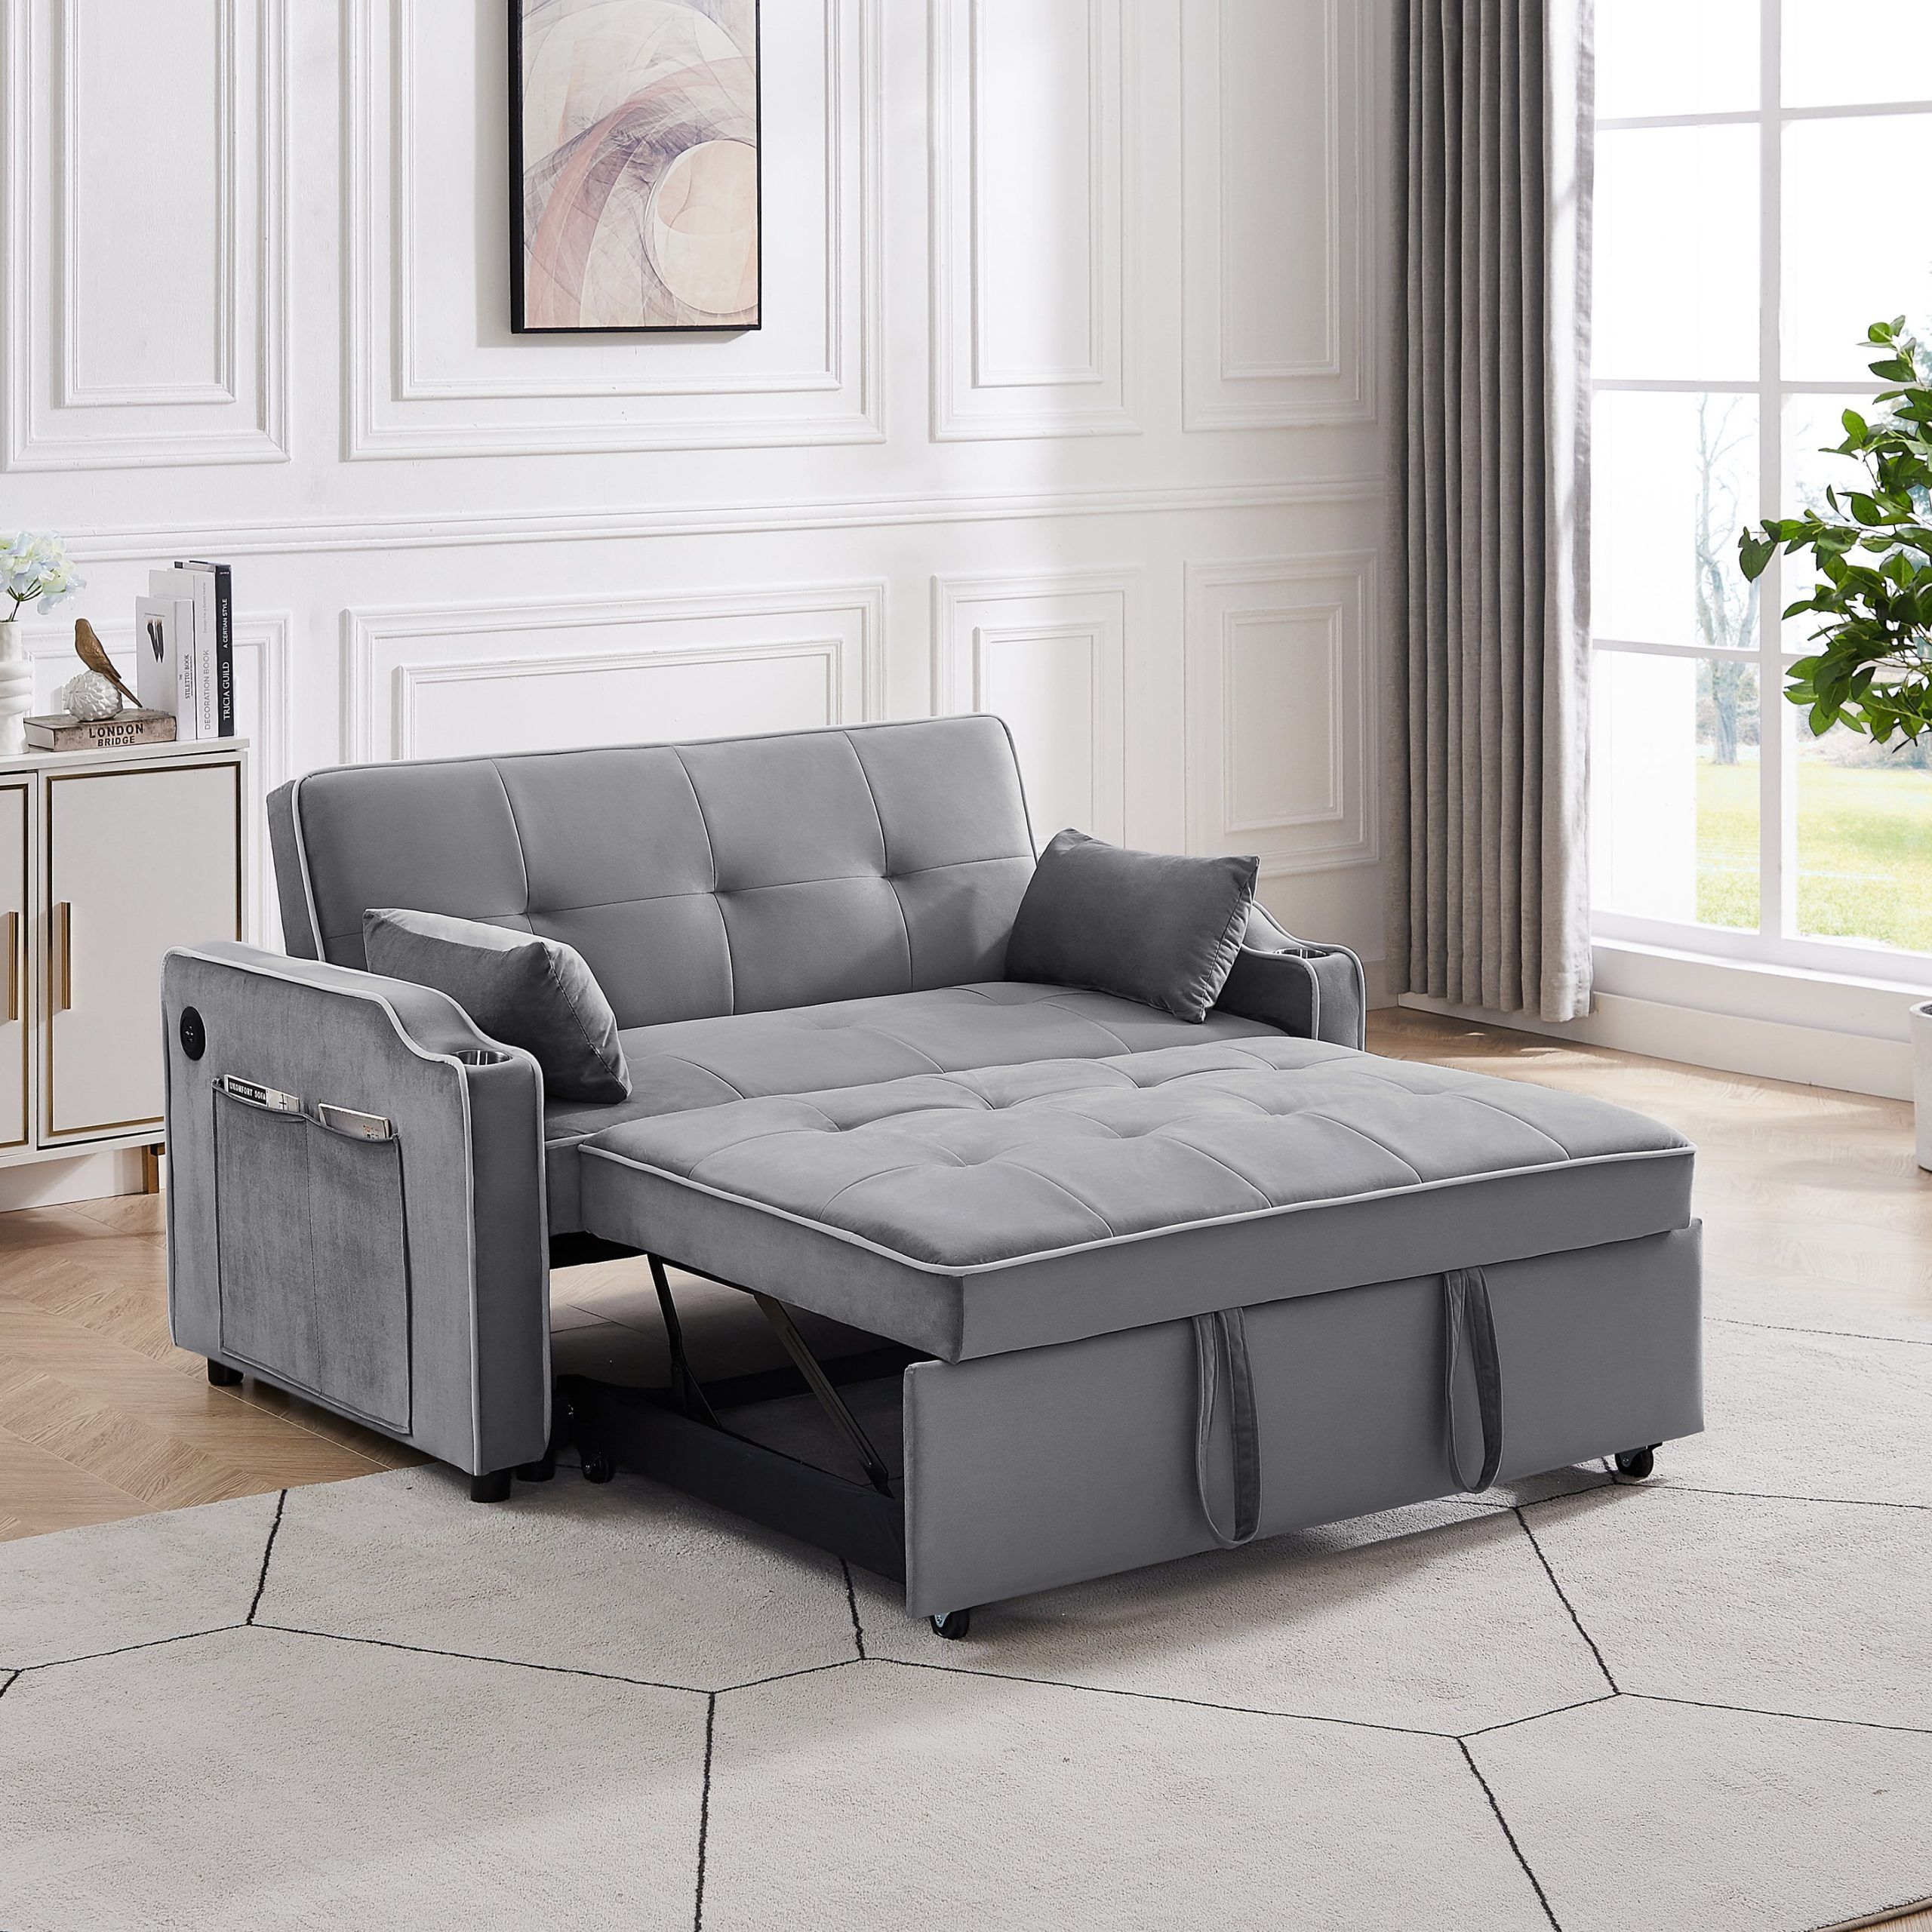 Momspeace Convertible Loveseat Sleeper With Cup Holders, Usb Ports And Side  Pockets, Gray – Walmart With Convertible Gray Loveseat Sleepers (View 4 of 15)